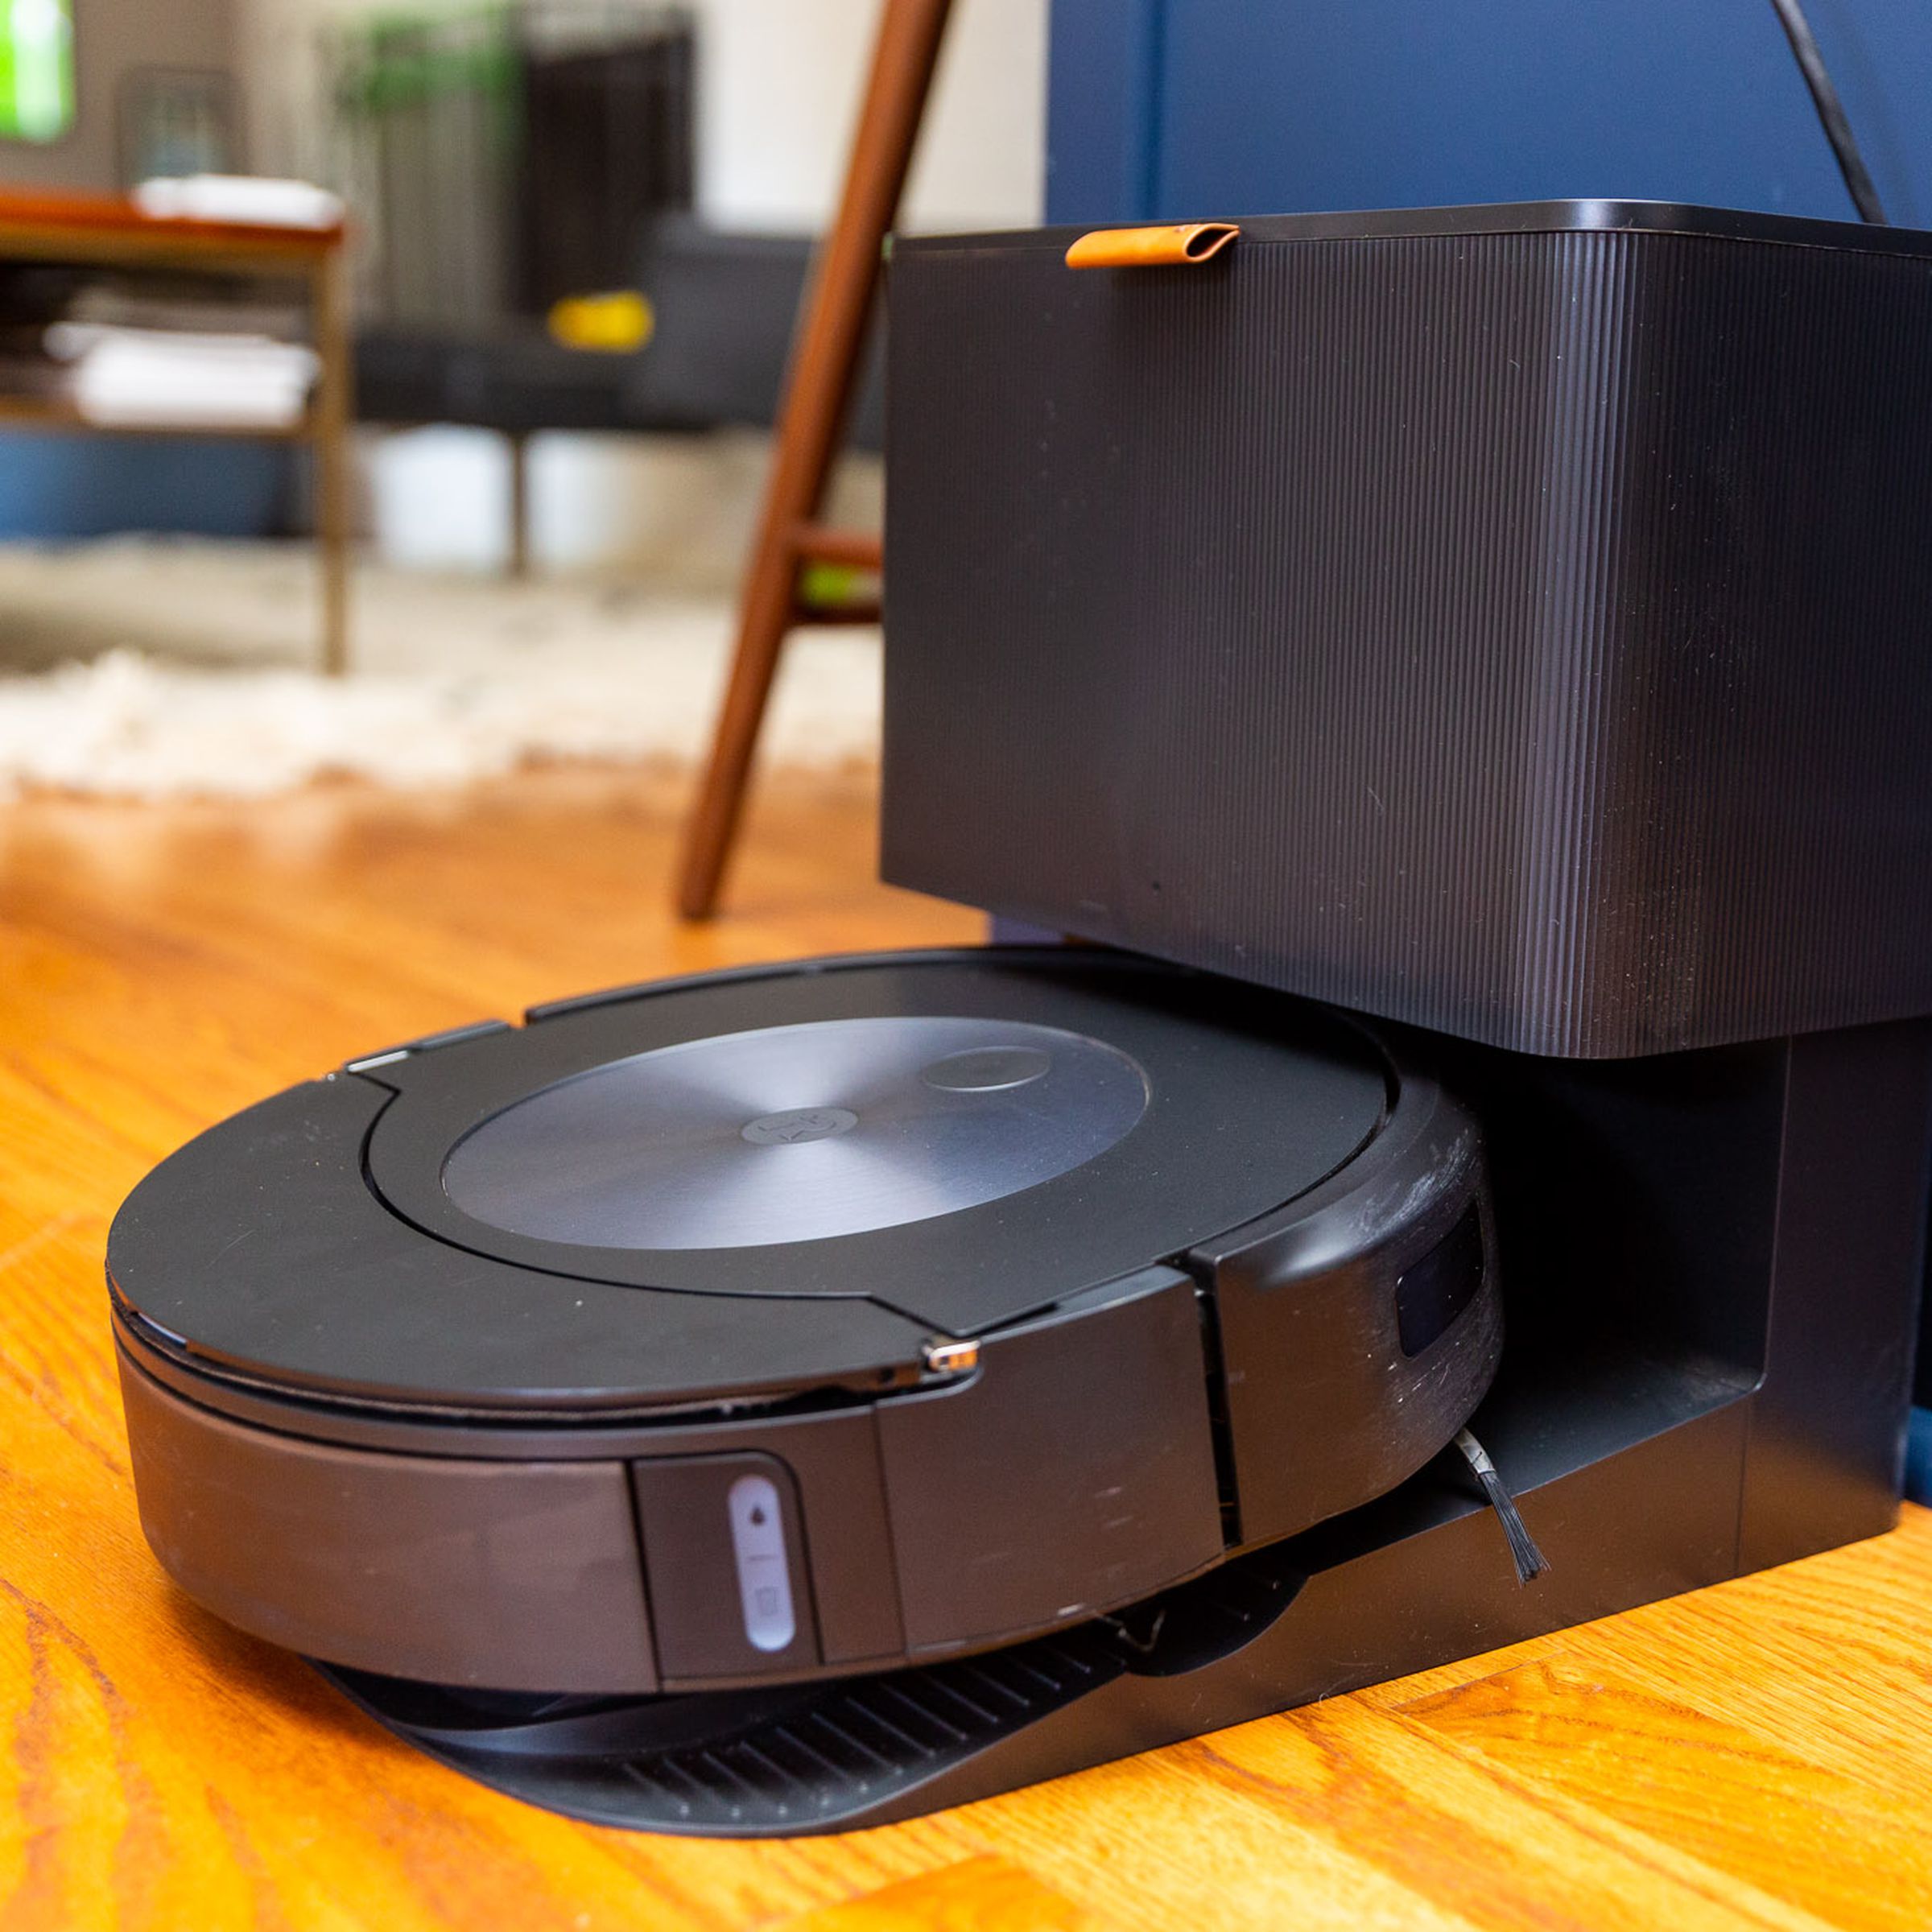 A Roomba vacuum on its docking station in an open plan kitchen living room.